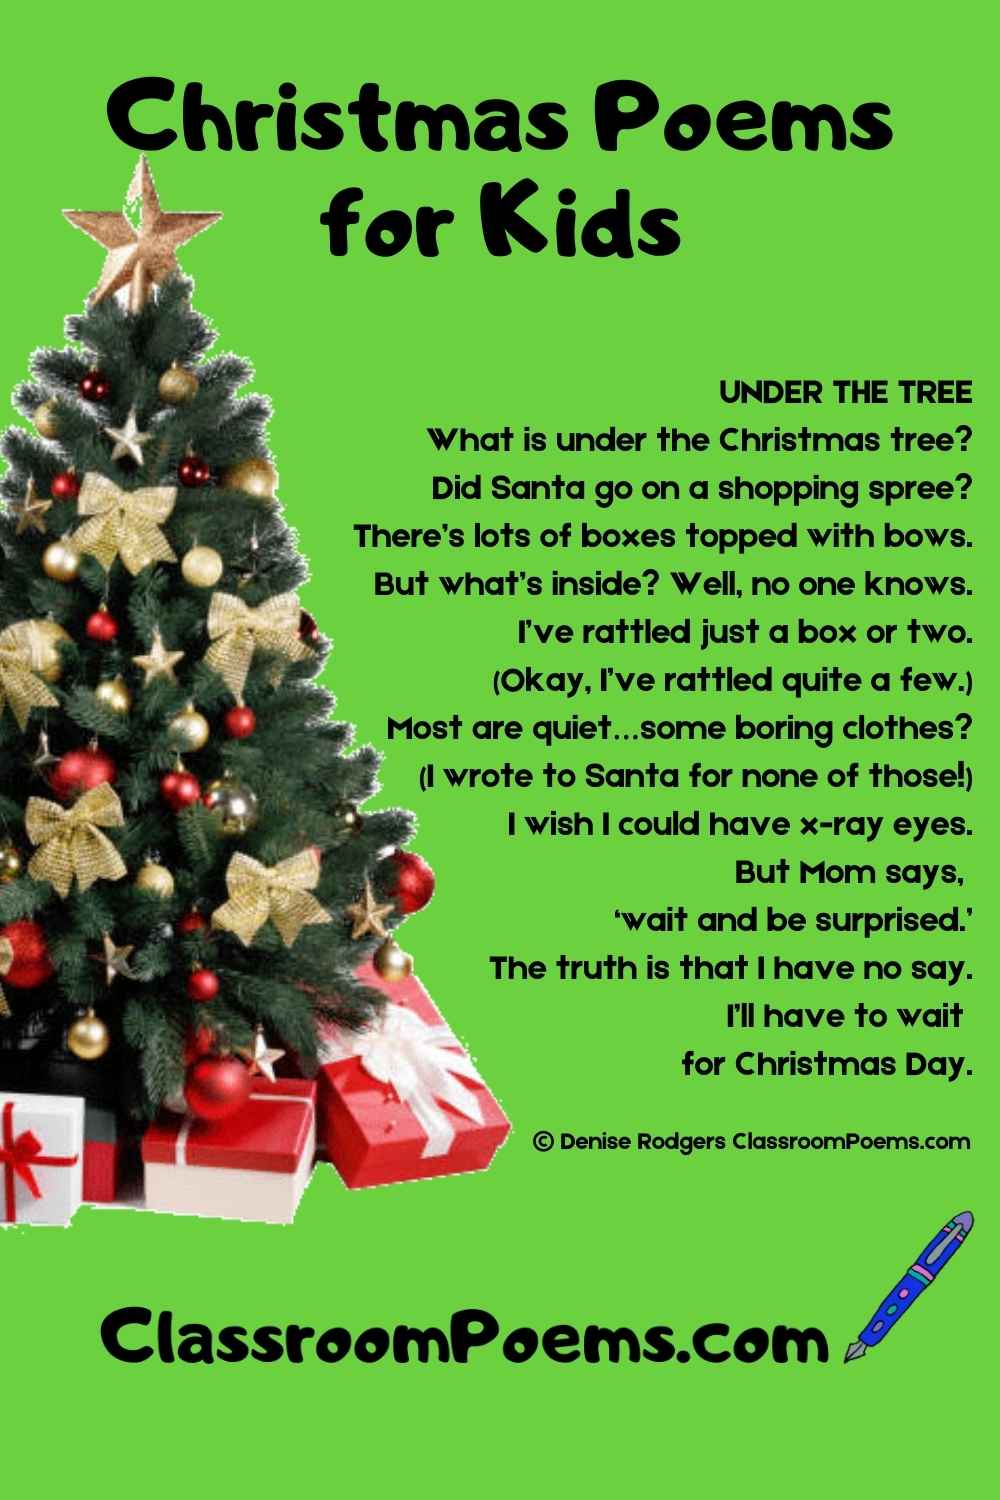 Christmas tree poem for kids by Denise Rodgers on ClassroomPoems.com.